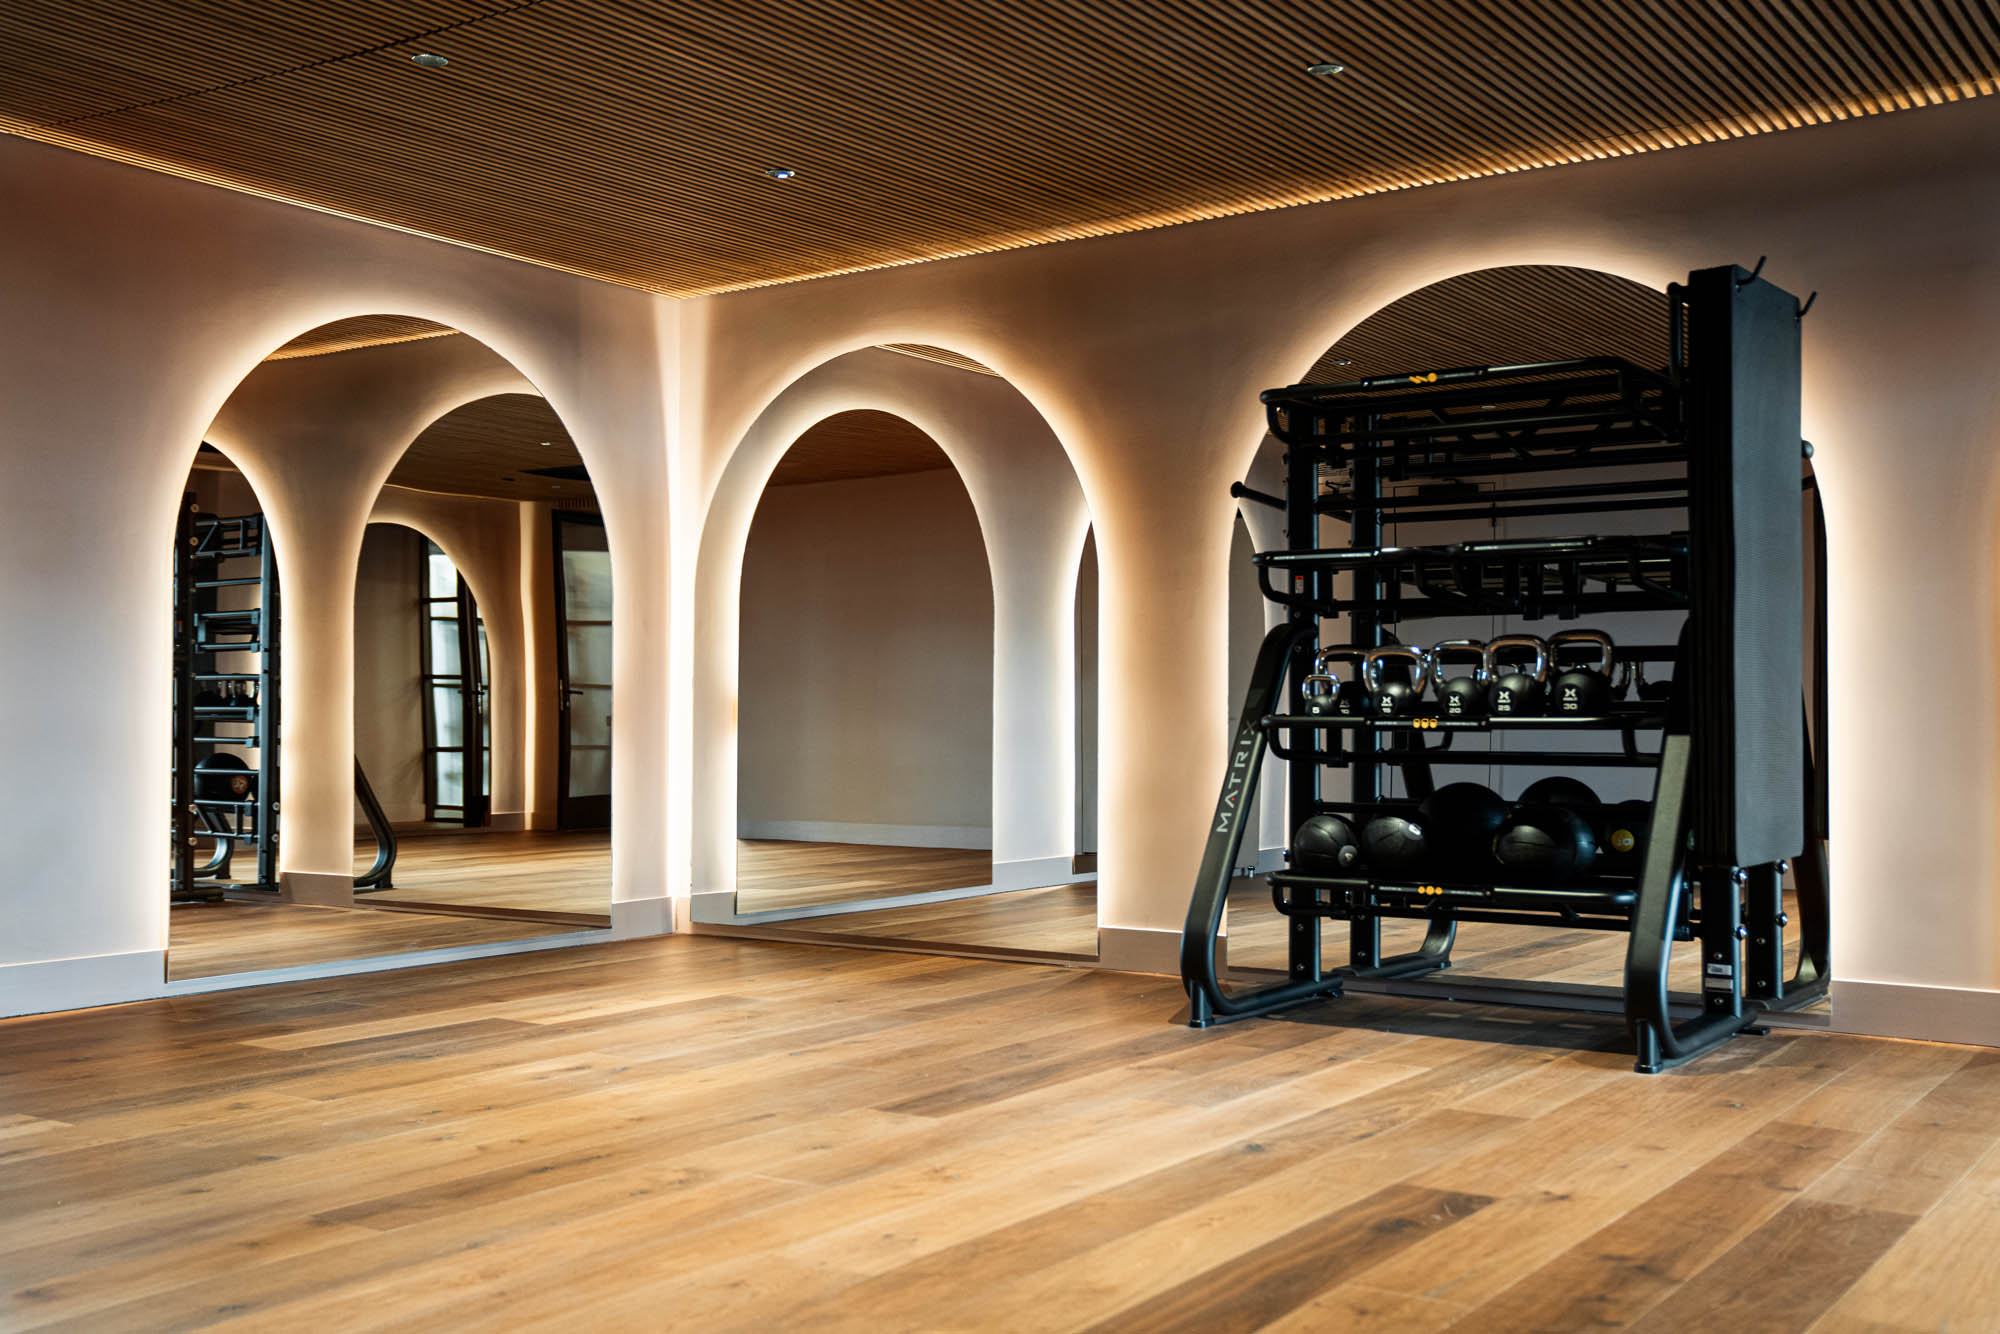 A fitness center with arch shaped back lit mirrors, a full dumbell stand, and wooden panel ceiling